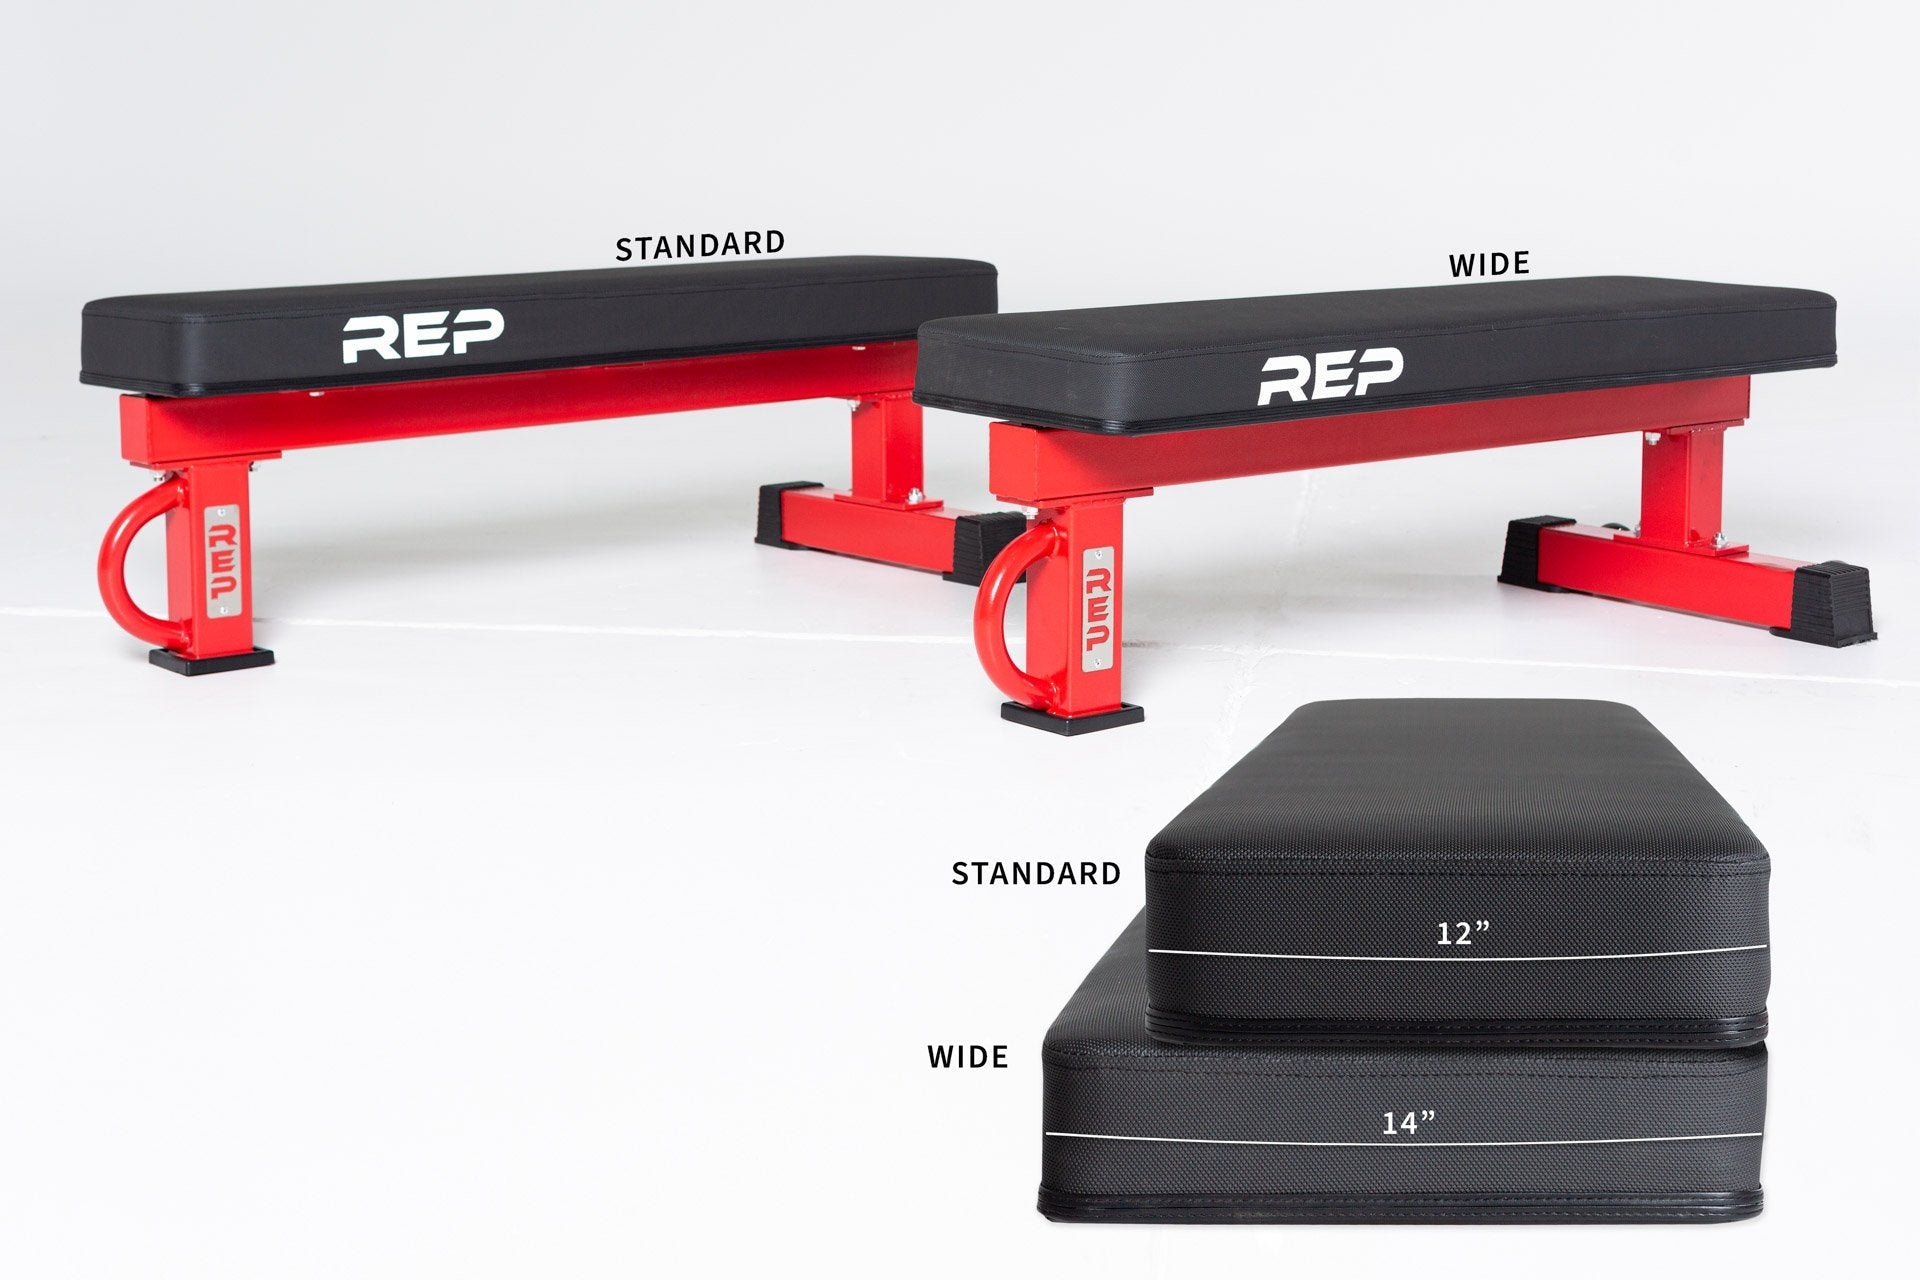 Standard vs Wide pad on red FB-5000 bench